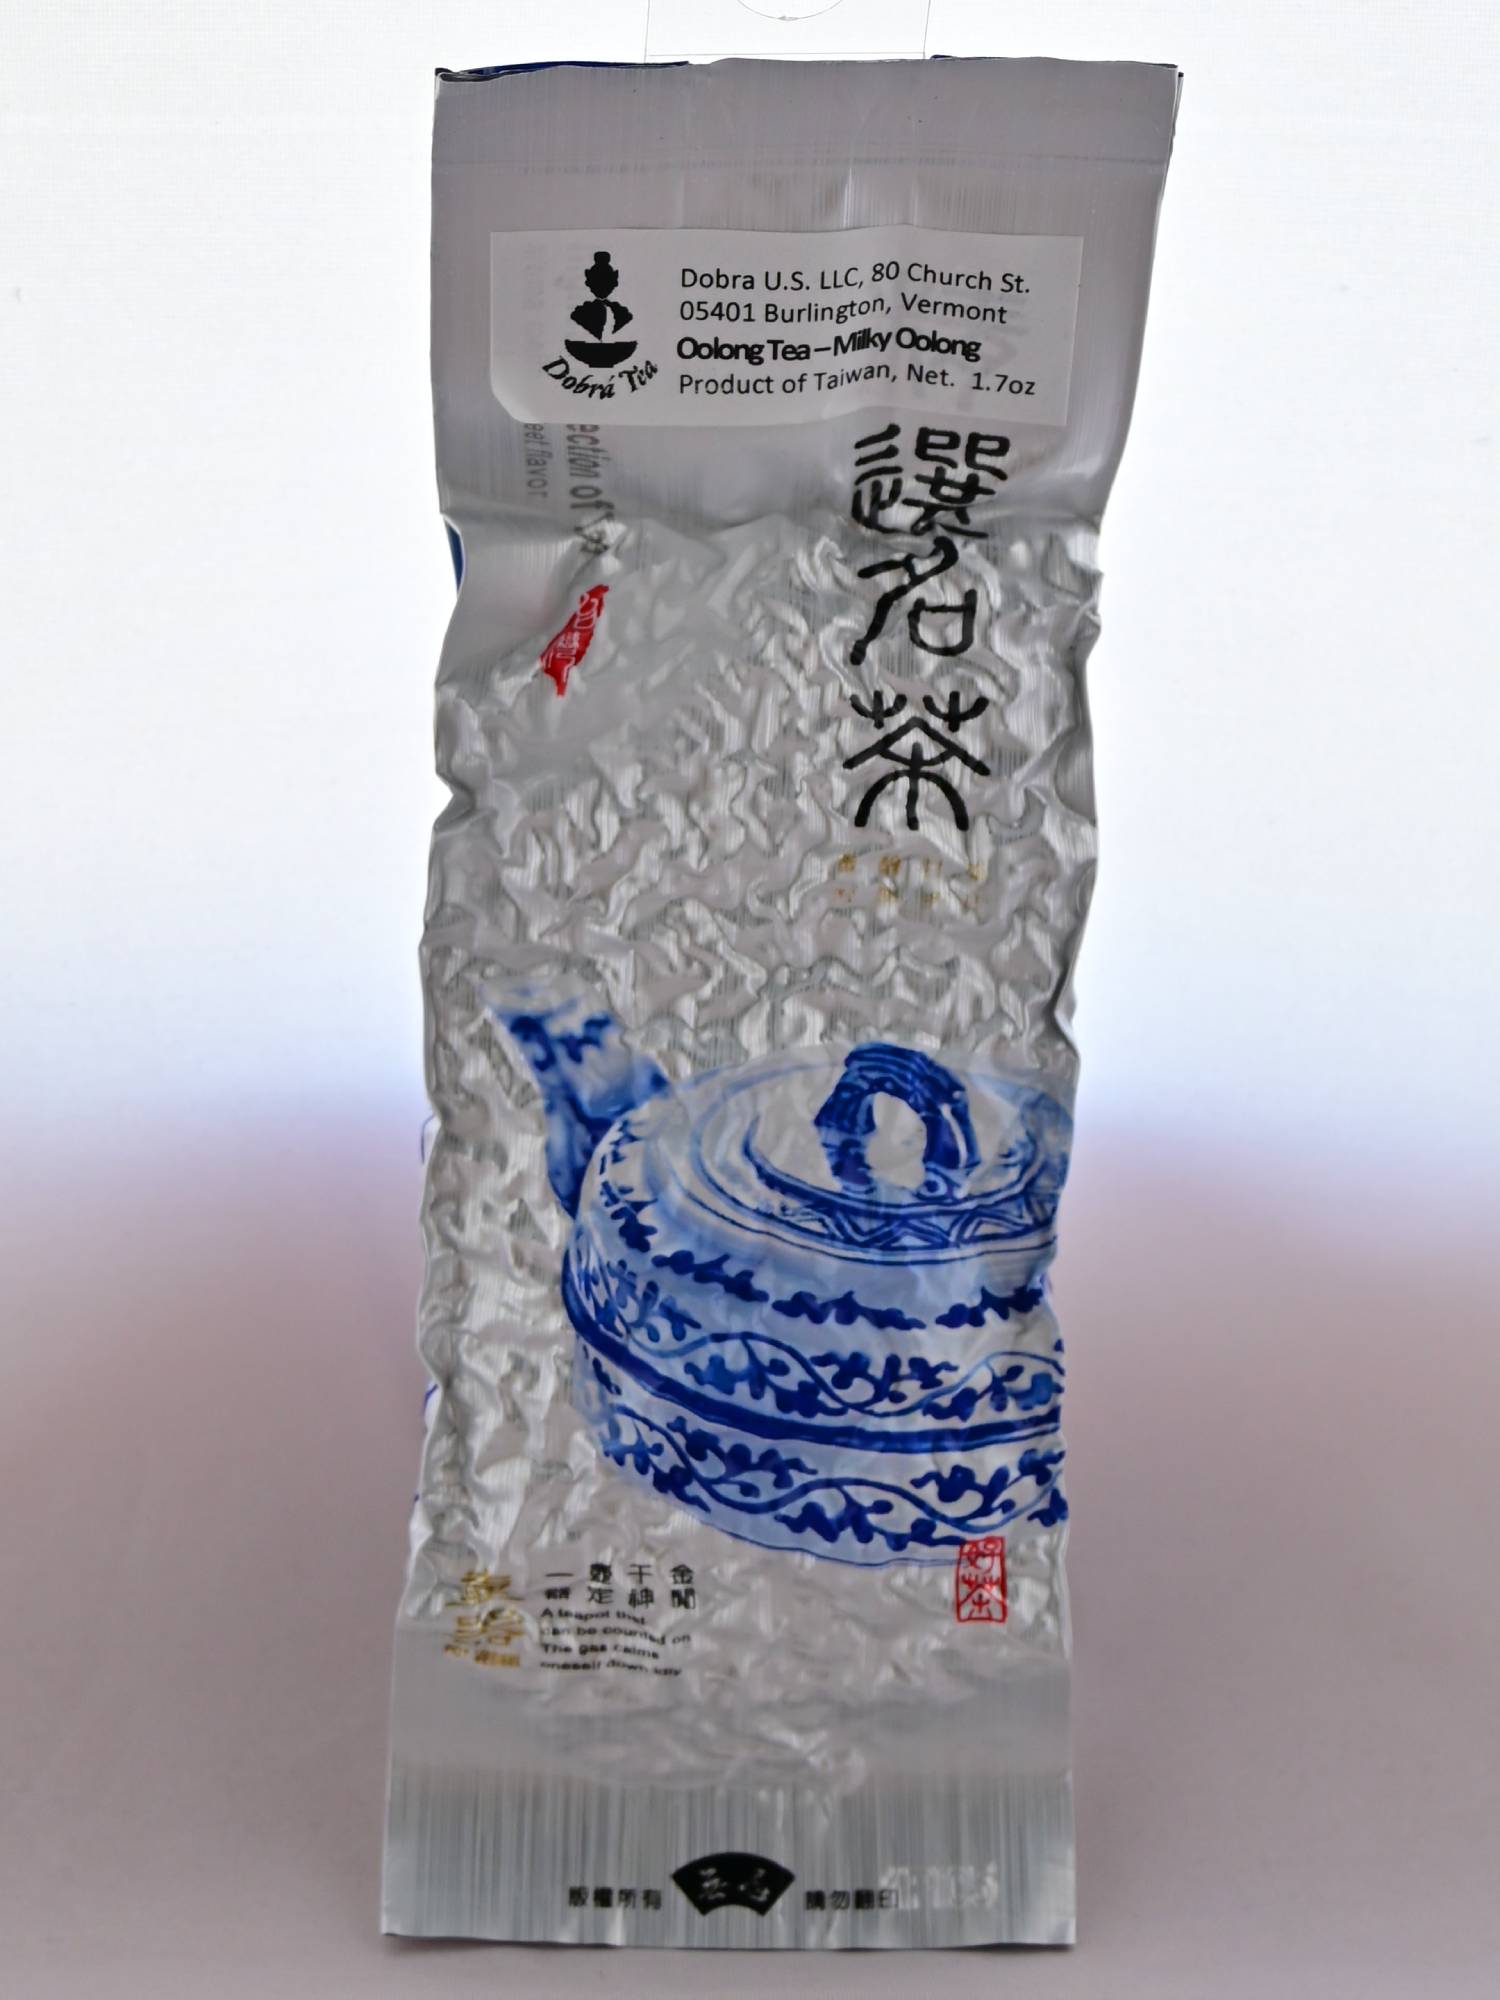 The plastic Ali Shan packaging is predominantly silver with a blue teapot in the bottom right. The package is rough and bumpy, characteristic of vacuum sealing around rolled tea leaves. A sticker at the top reads: "Dobra US LLC. 80 Church St. 05401 Burlington Vermont. Oolong Tea - Milky Oolong. Product of Taiwan. Net weight 1.7 oz."